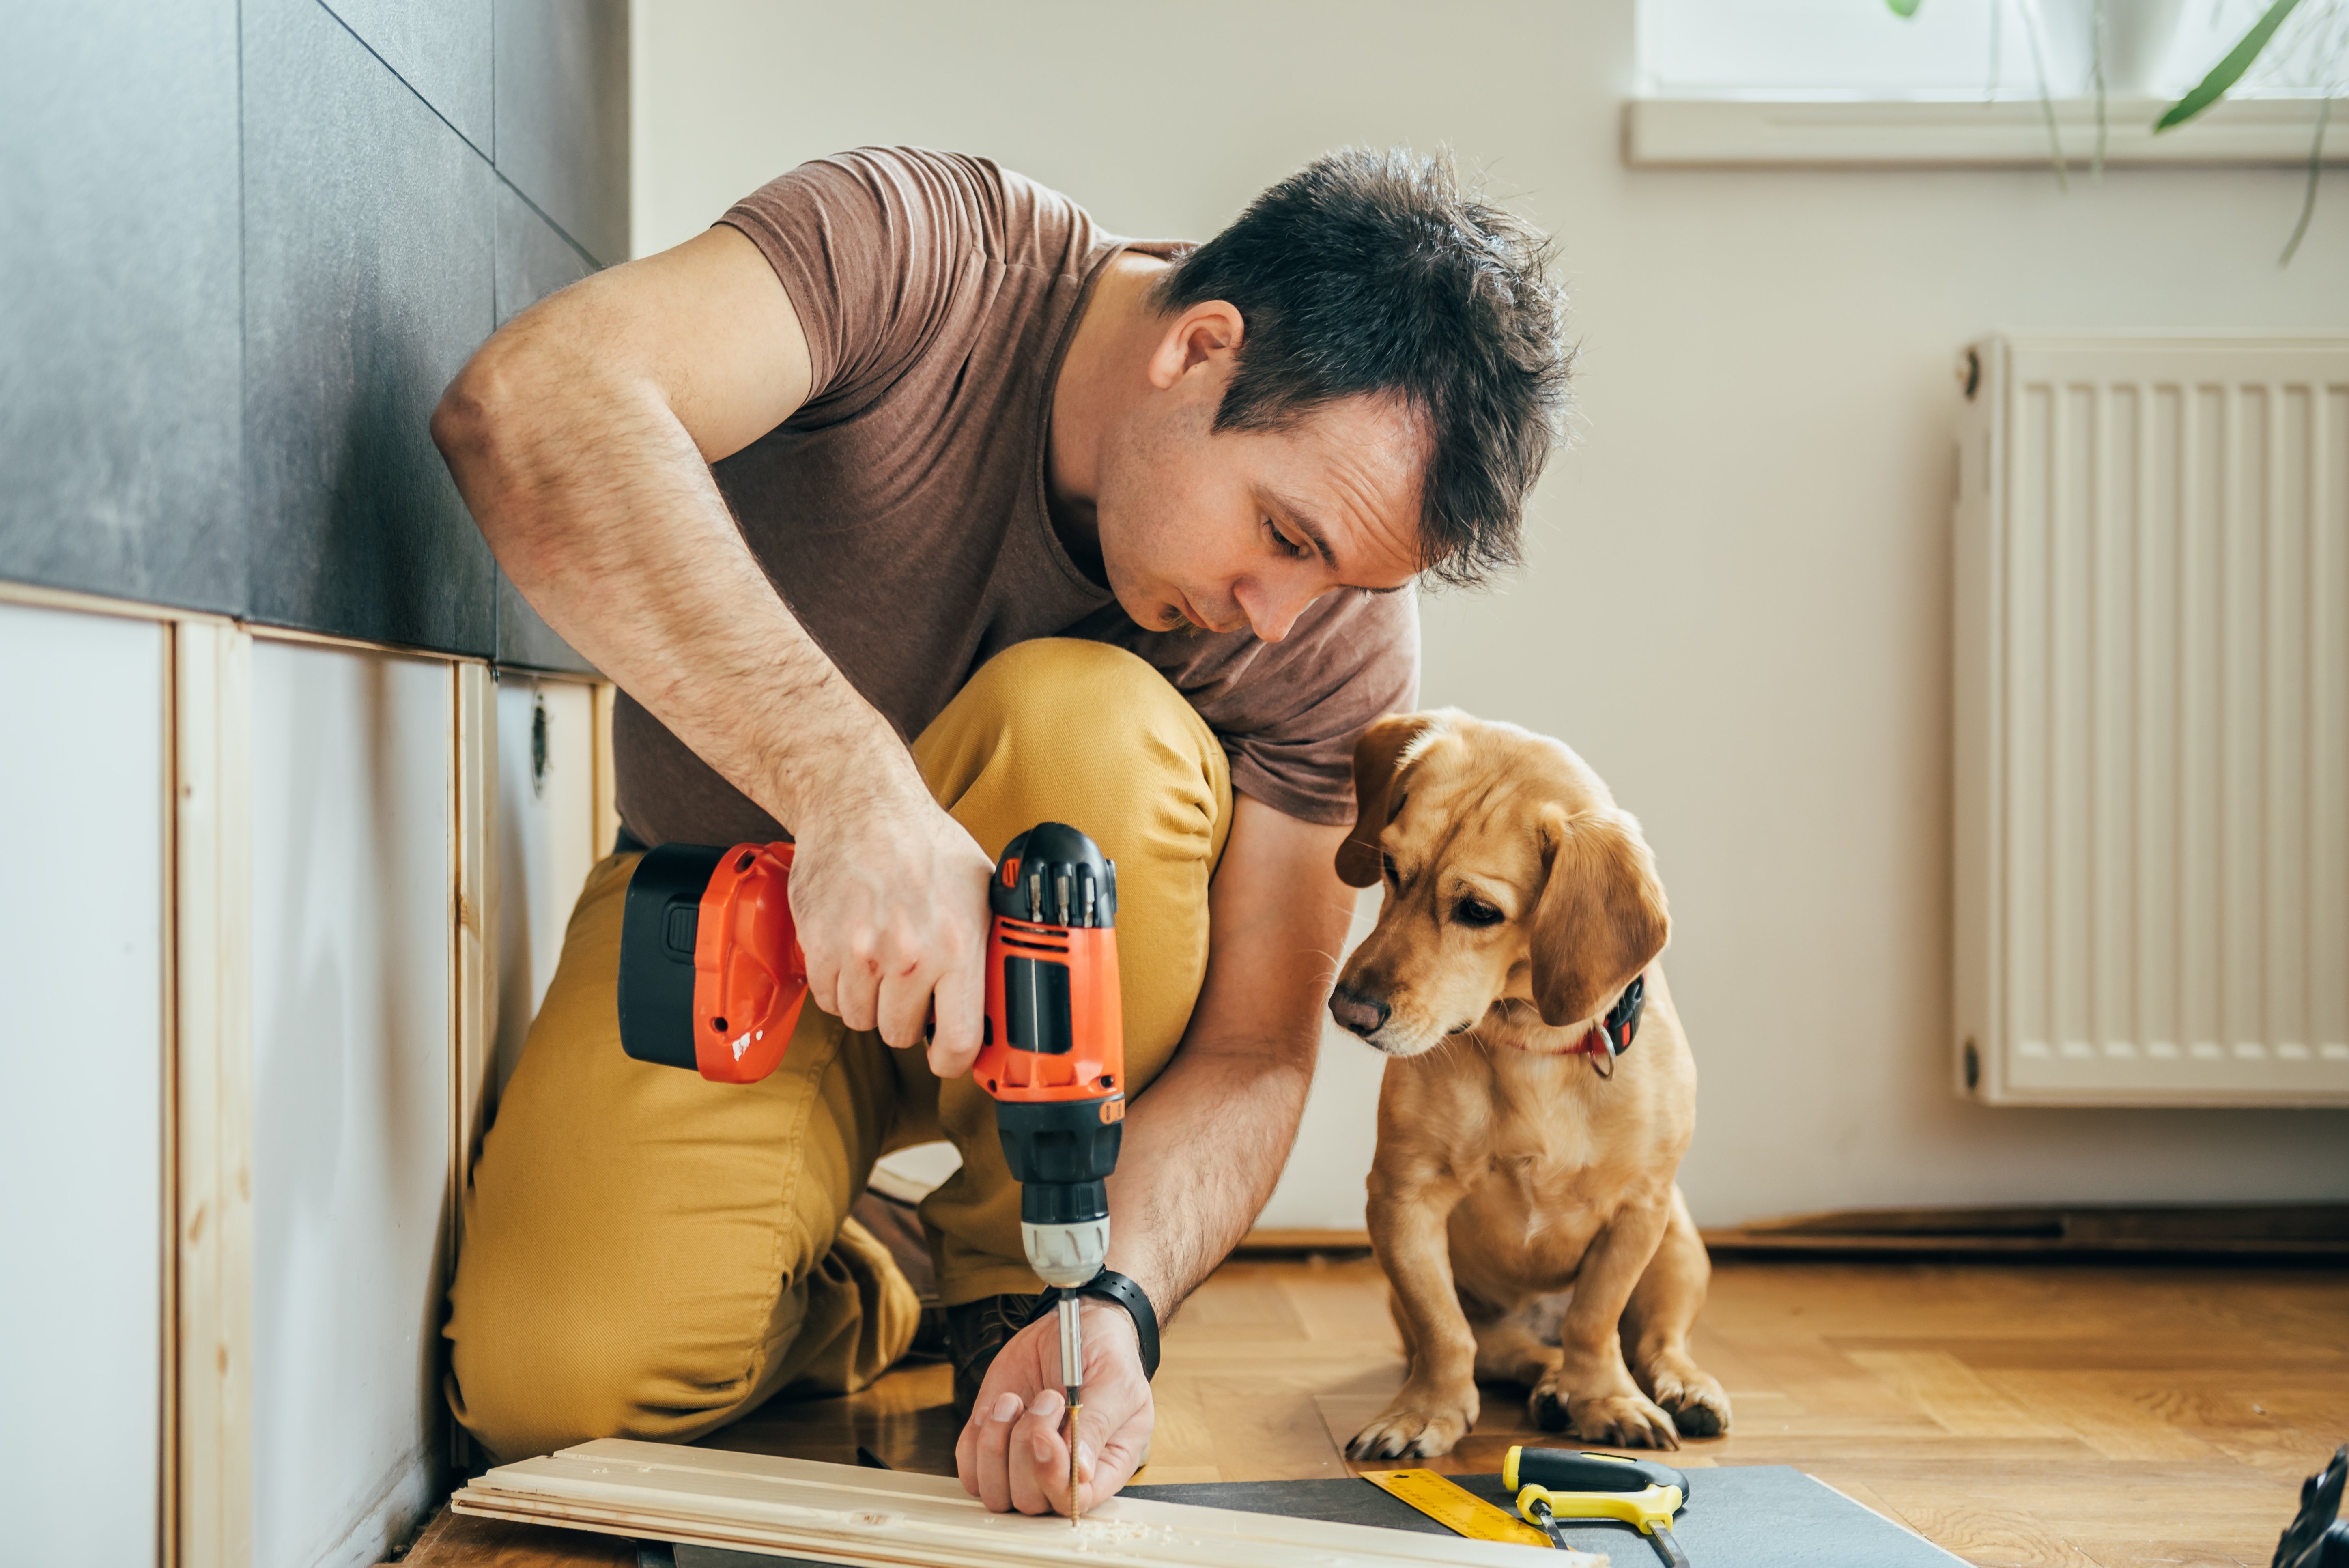 man installing flooring while a puppy watches - Contract Interiors in Fort Wayne, IN